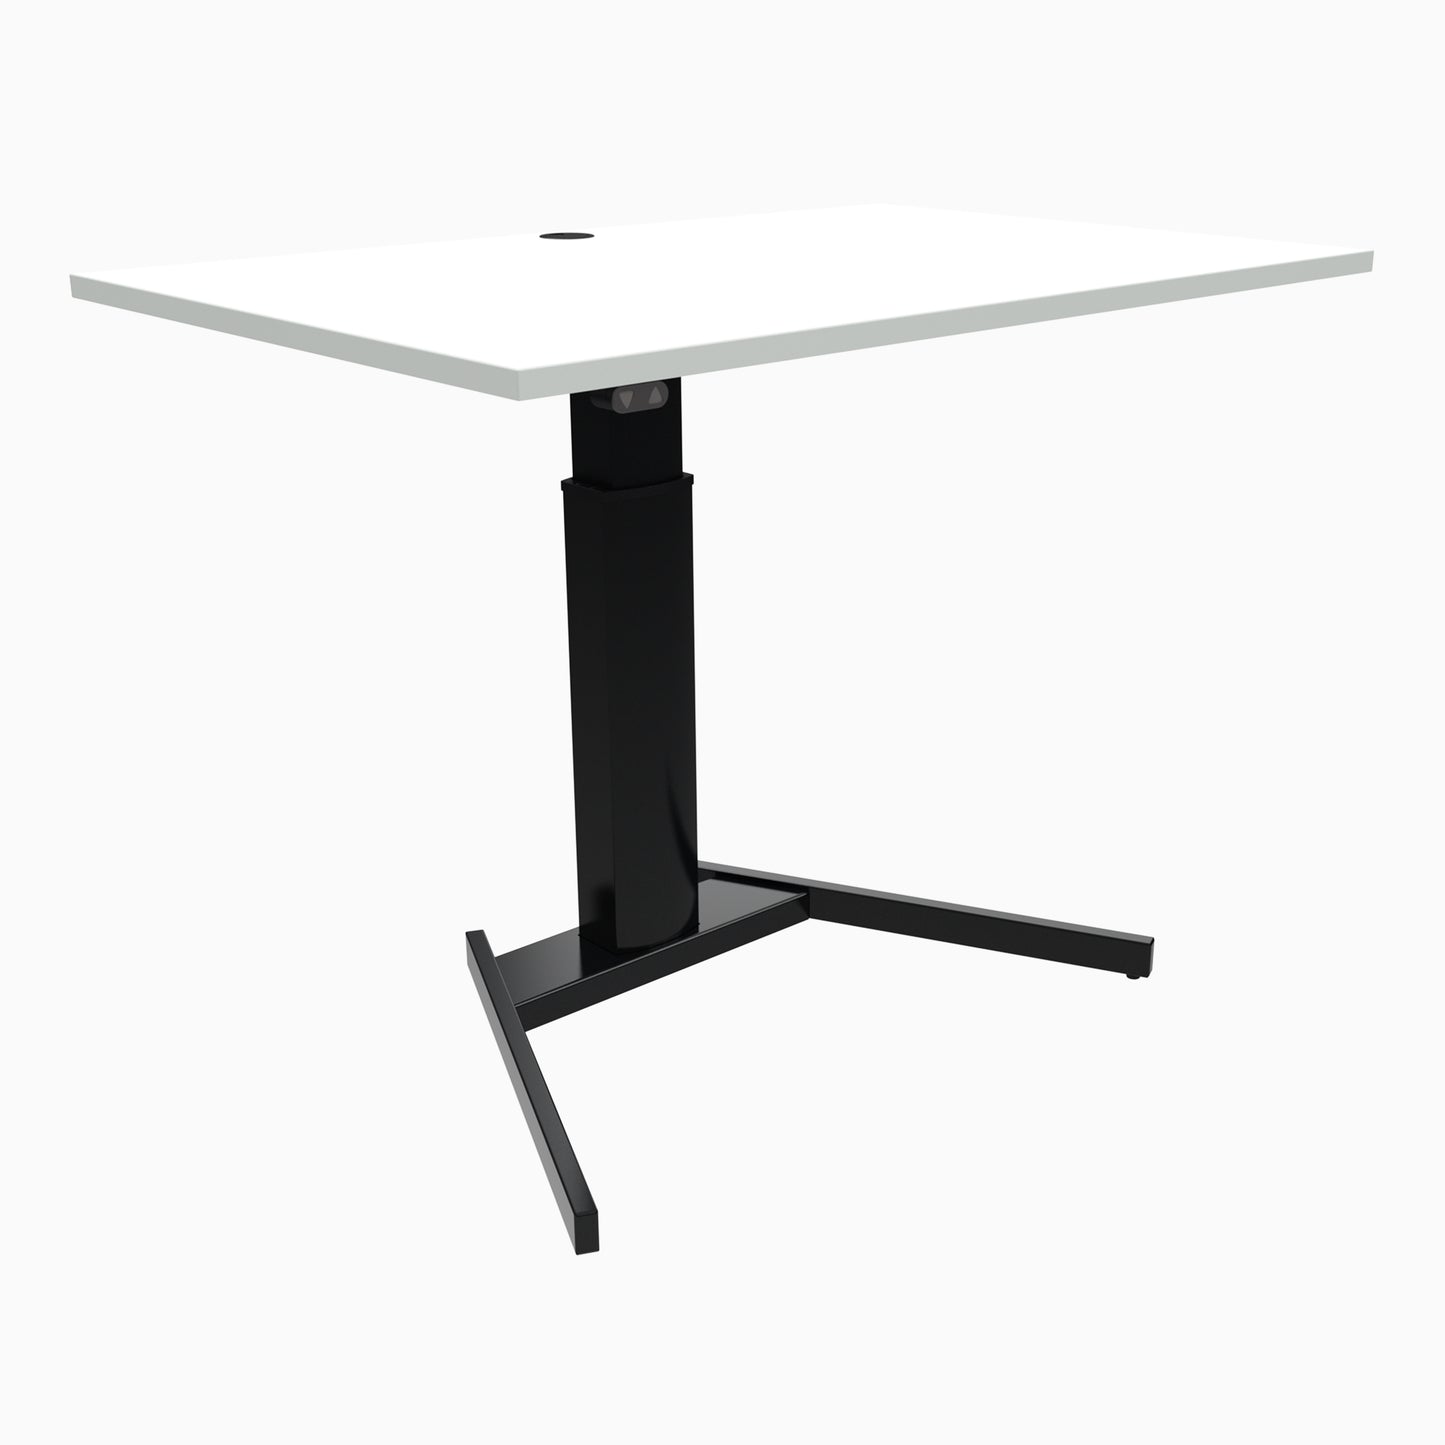 ConSet 501-19 095 Electric Height Adjustable Single Leg Sit Stand Desk